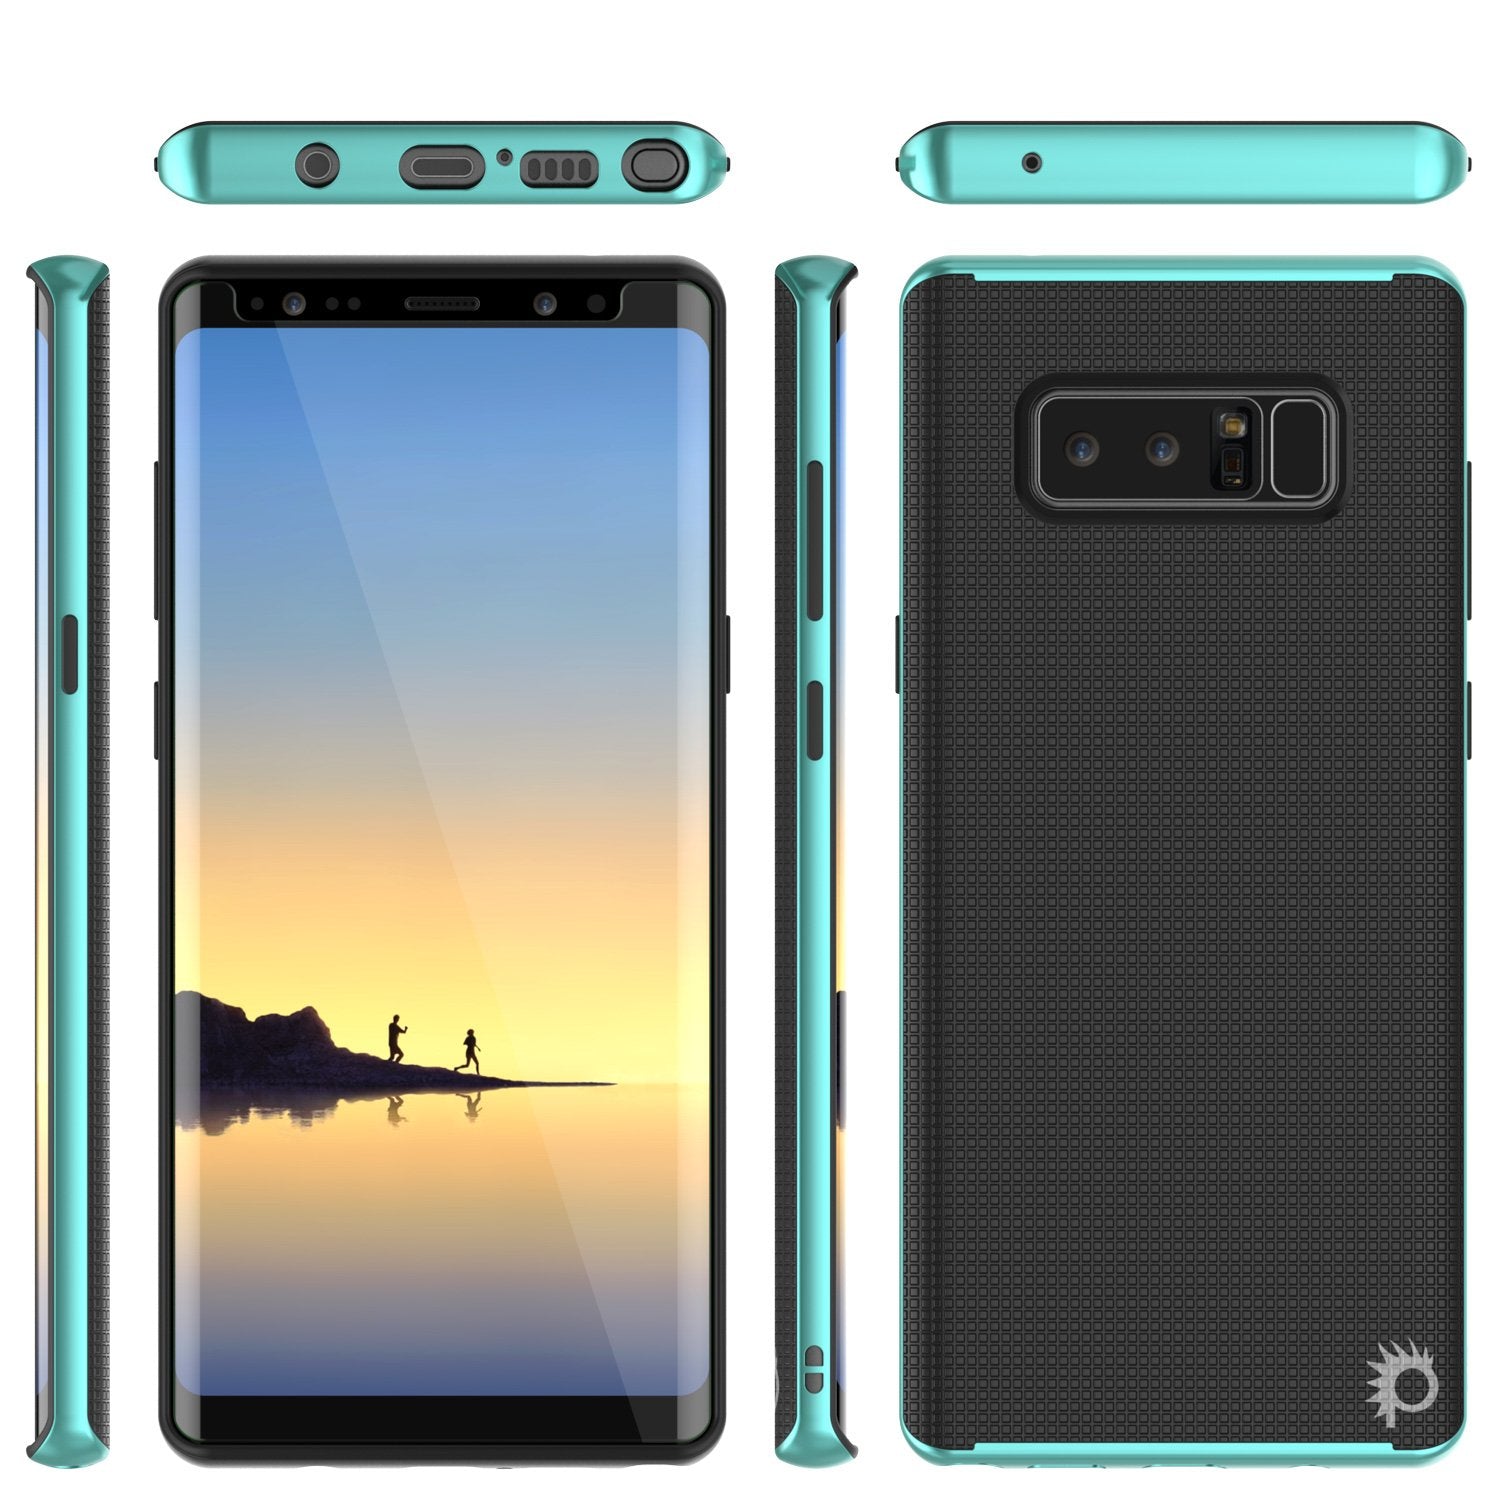 Galaxy Note 8 Case, PunkCase [Stealth Series] Hybrid 3-Piece Shockproof Dual Layer Cover [Non-Slip] [Soft TPU + PC Bumper] with PUNKSHIELD Screen Protector for Samsung Note 8 [Teal] - PunkCase NZ